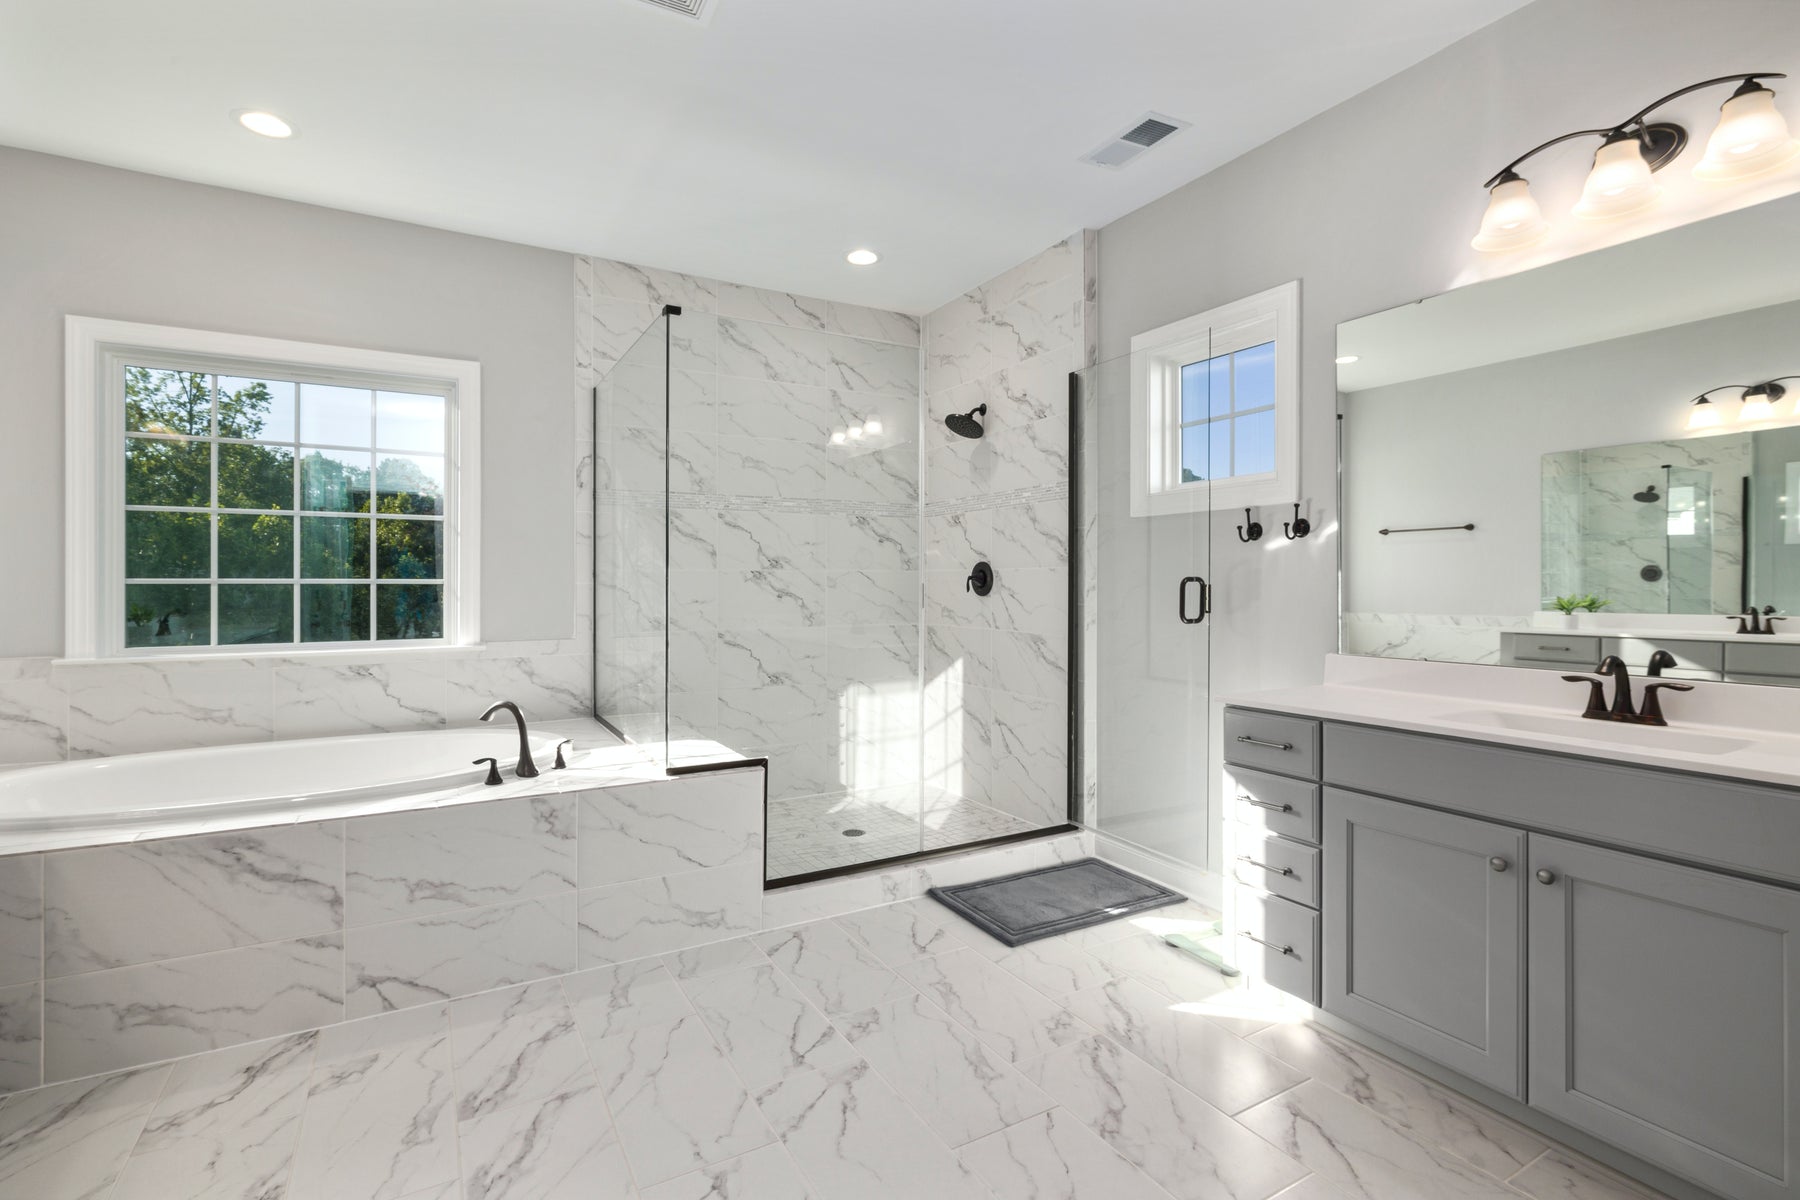 MARBLE: STRENGTH AND BEAUTY TO CREATE A COMFORTABLE ATMOSPHERE